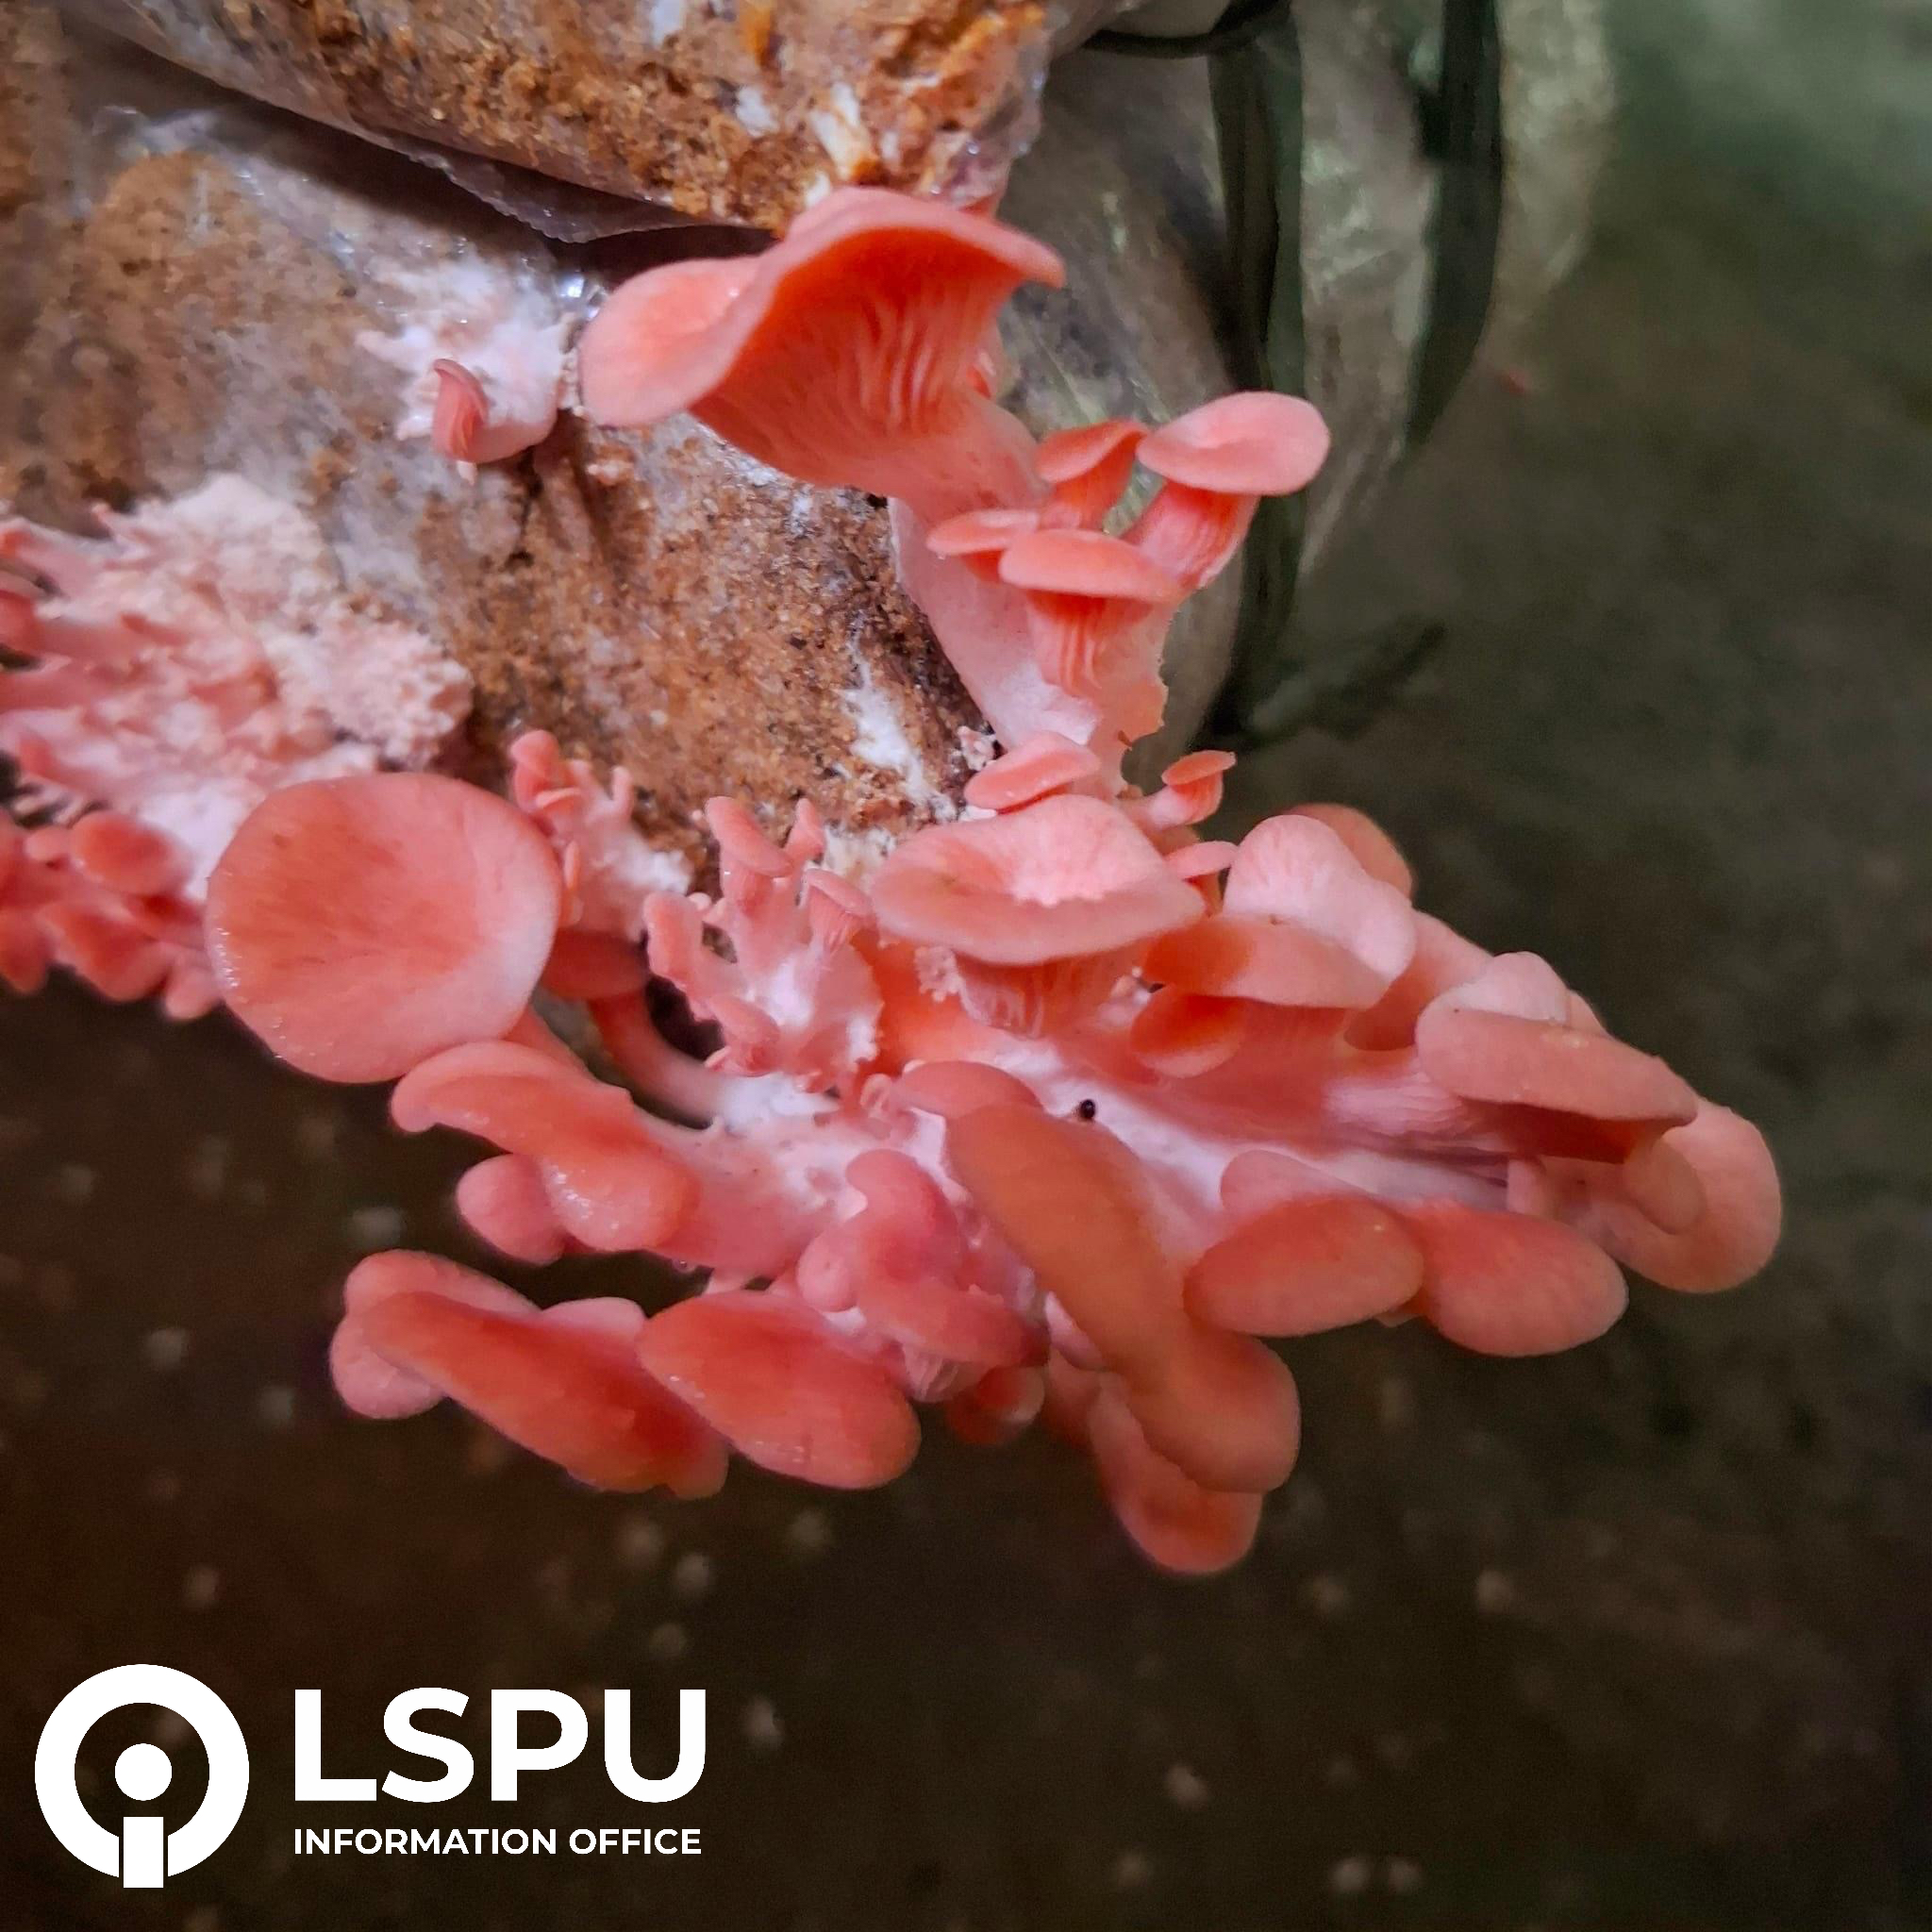 Pretty in Pink: Introducing the Aesthetic and Delicious Mushroom of LSPU